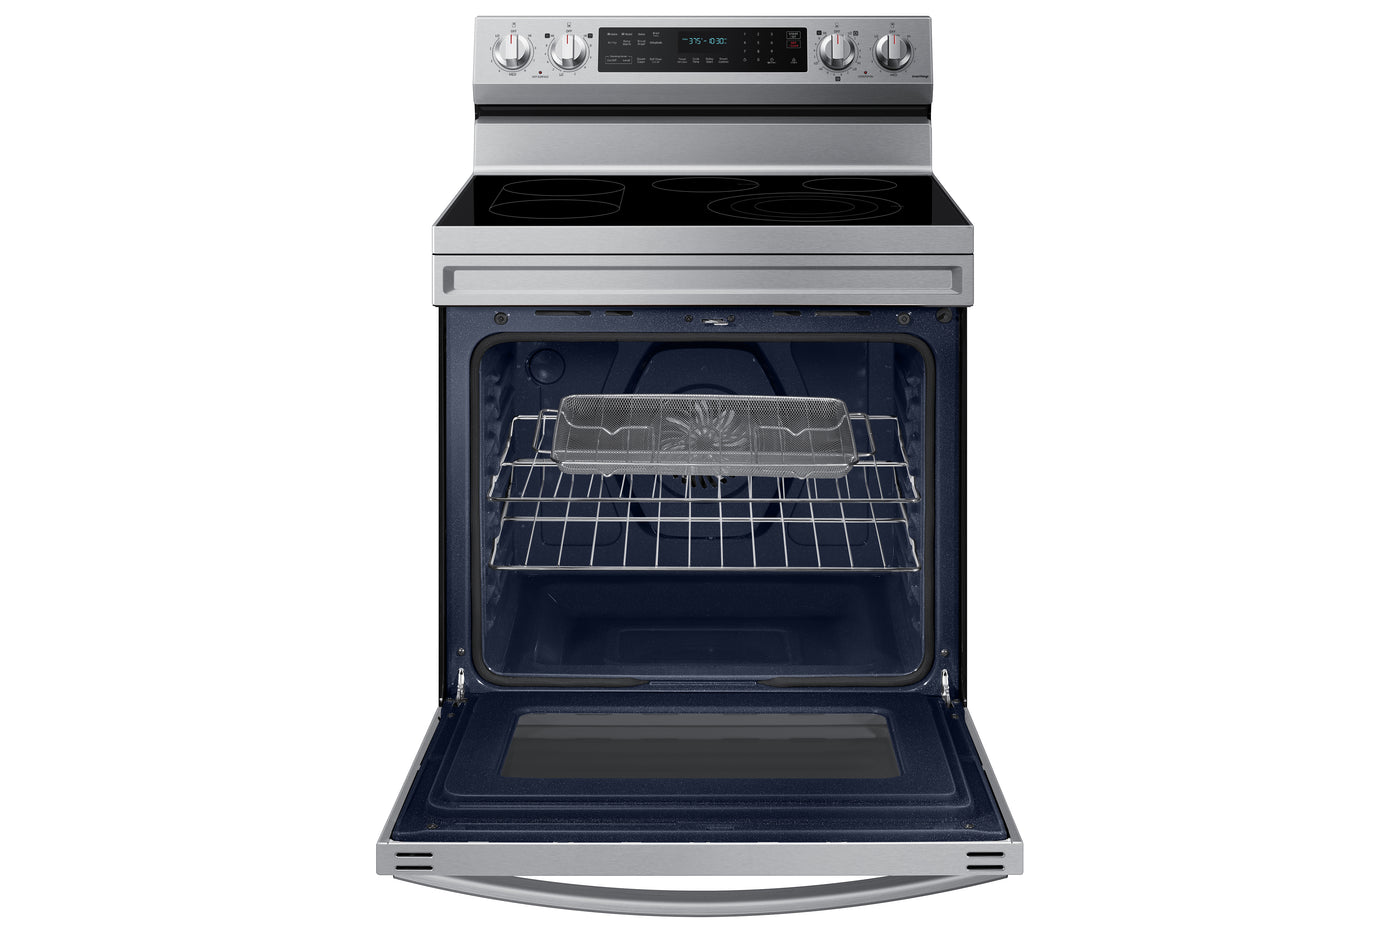 Samsung Stainless Steel Freestanding Electric True Convection Range with Air Fry and Wi-Fi (6.3 Cu.Ft) - NE63A6711SS/AC